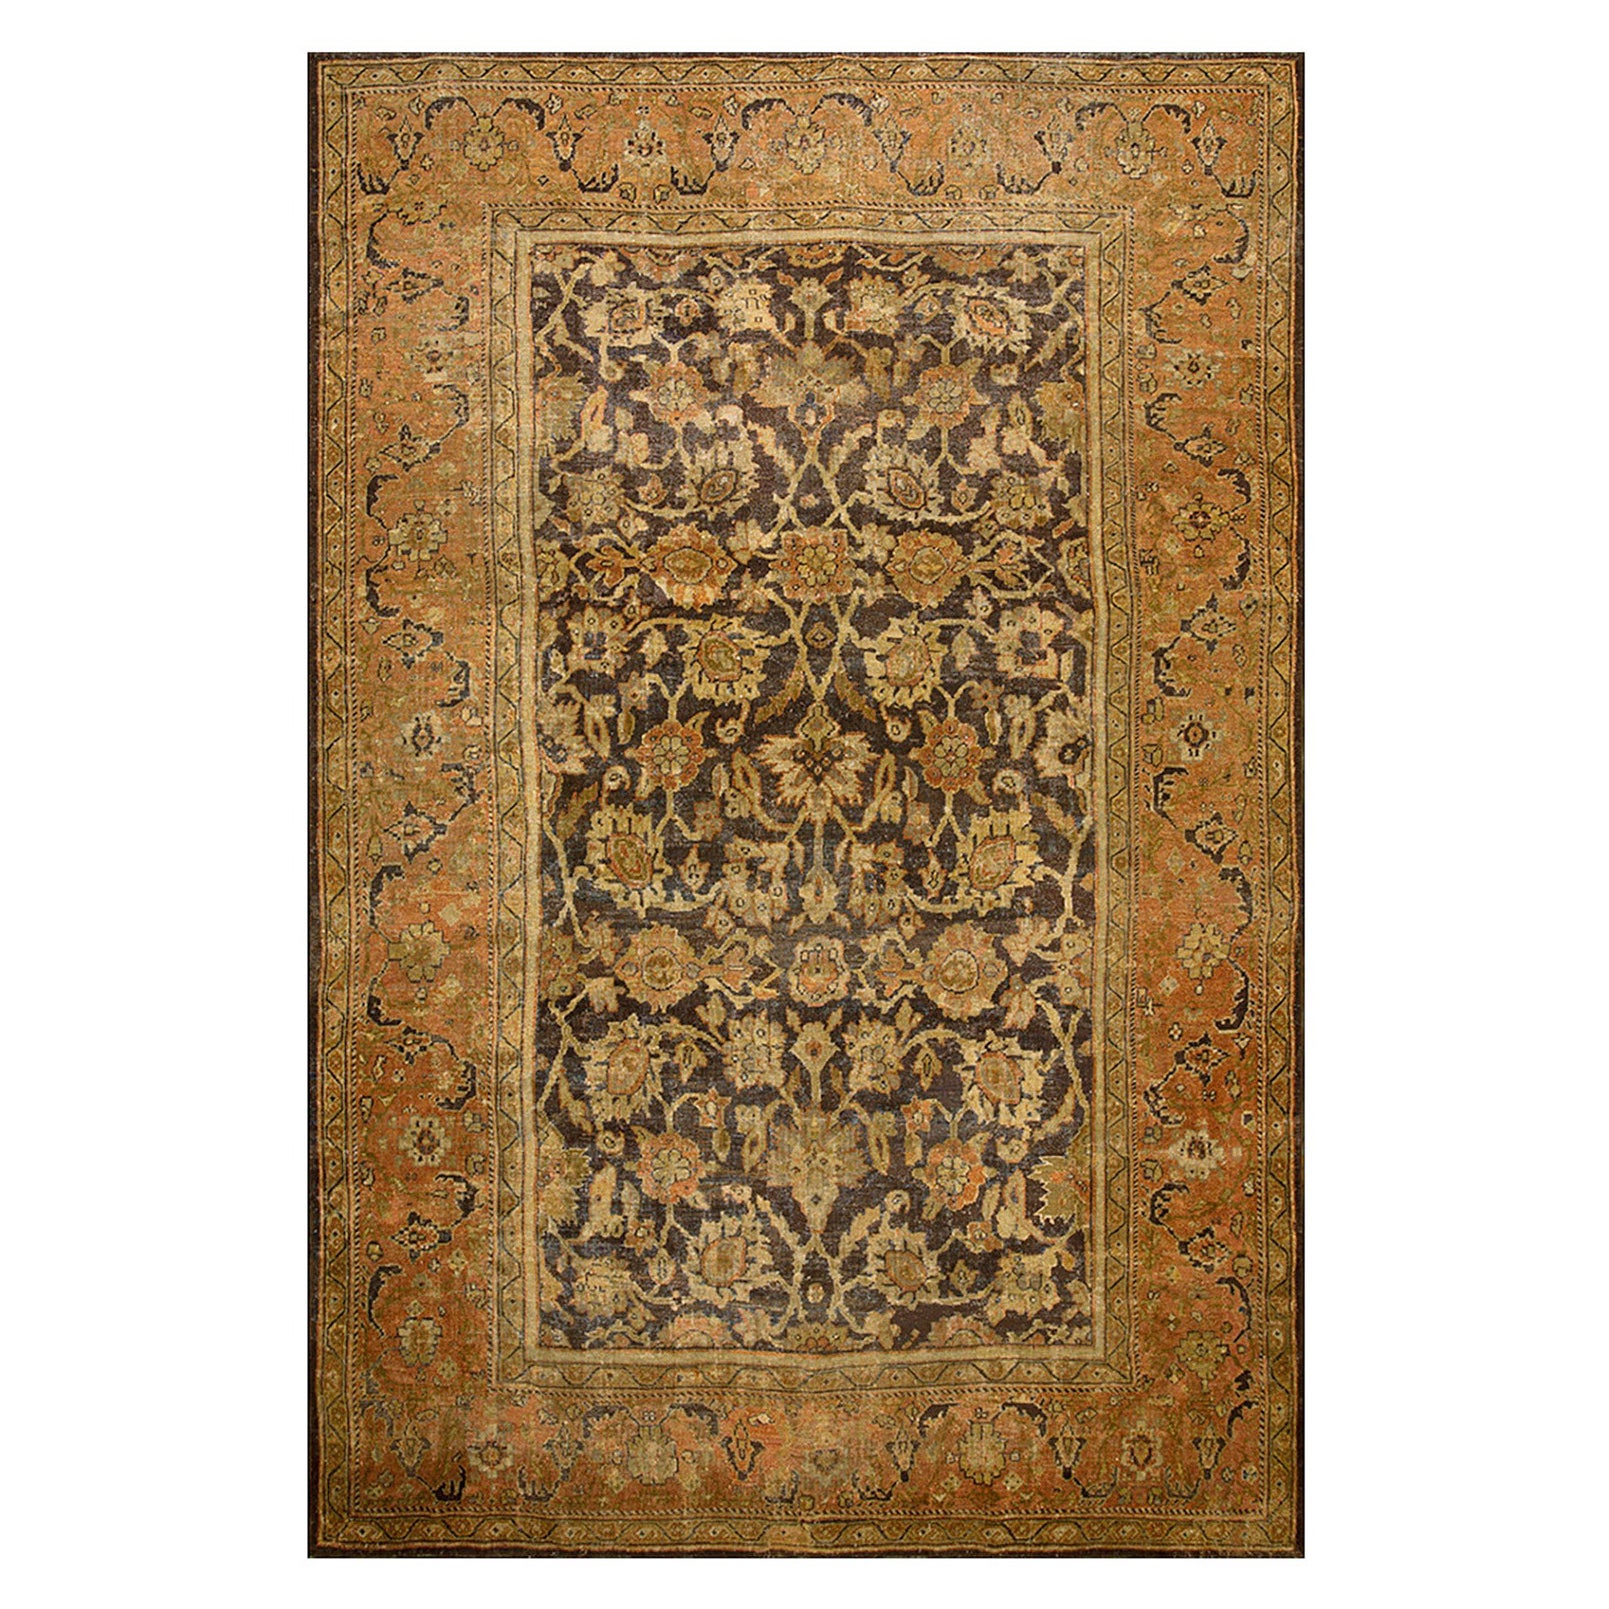 Late 19th Century  Persian Sultanabad Carpet ( 9' x 13' 4'' - 275 x 405 ) For Sale